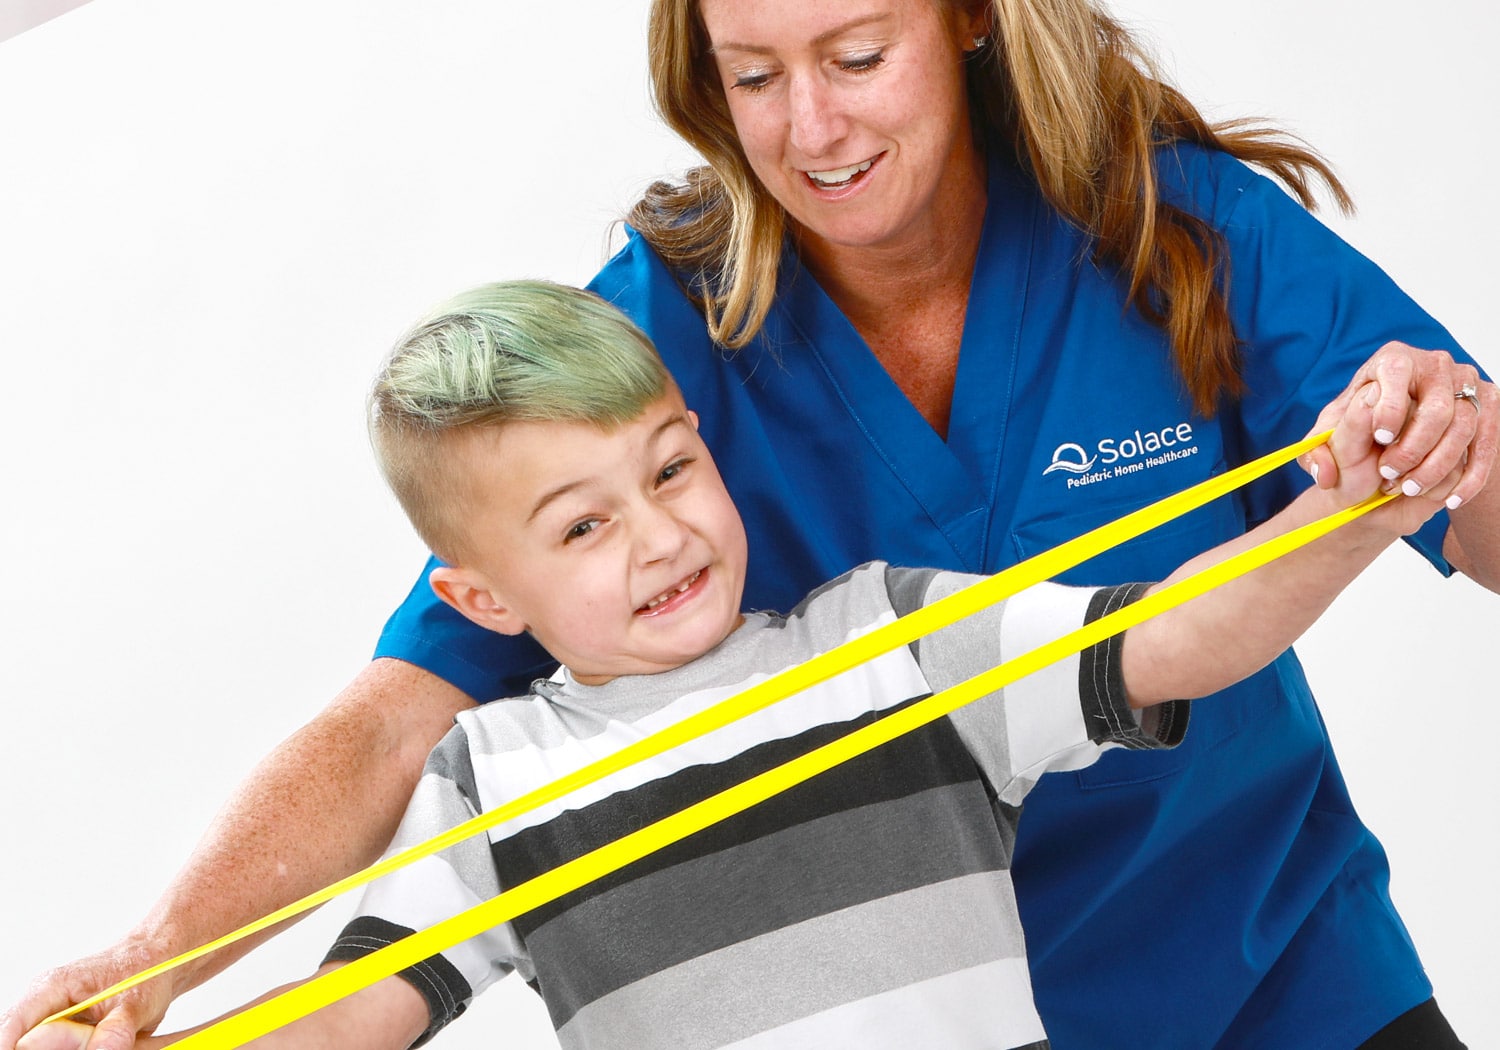 Our PT team is specifically trained in pediatrics and dedicated to providing skilled, evidence-based, patient focused care.